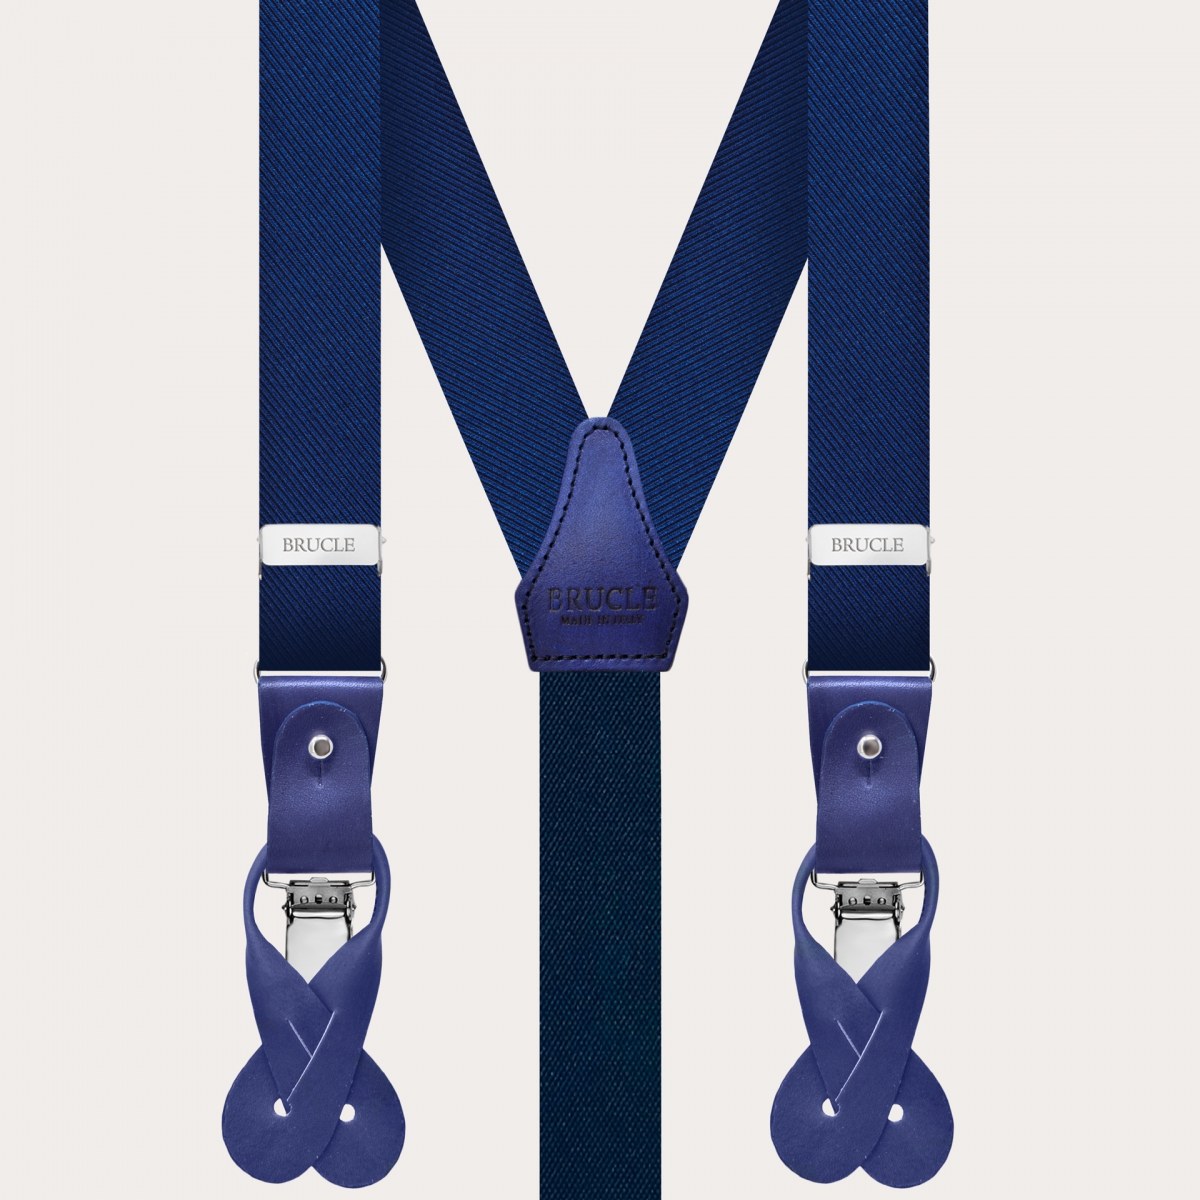 Men's Narrow Silk Suspenders, Hand-Colored Leather